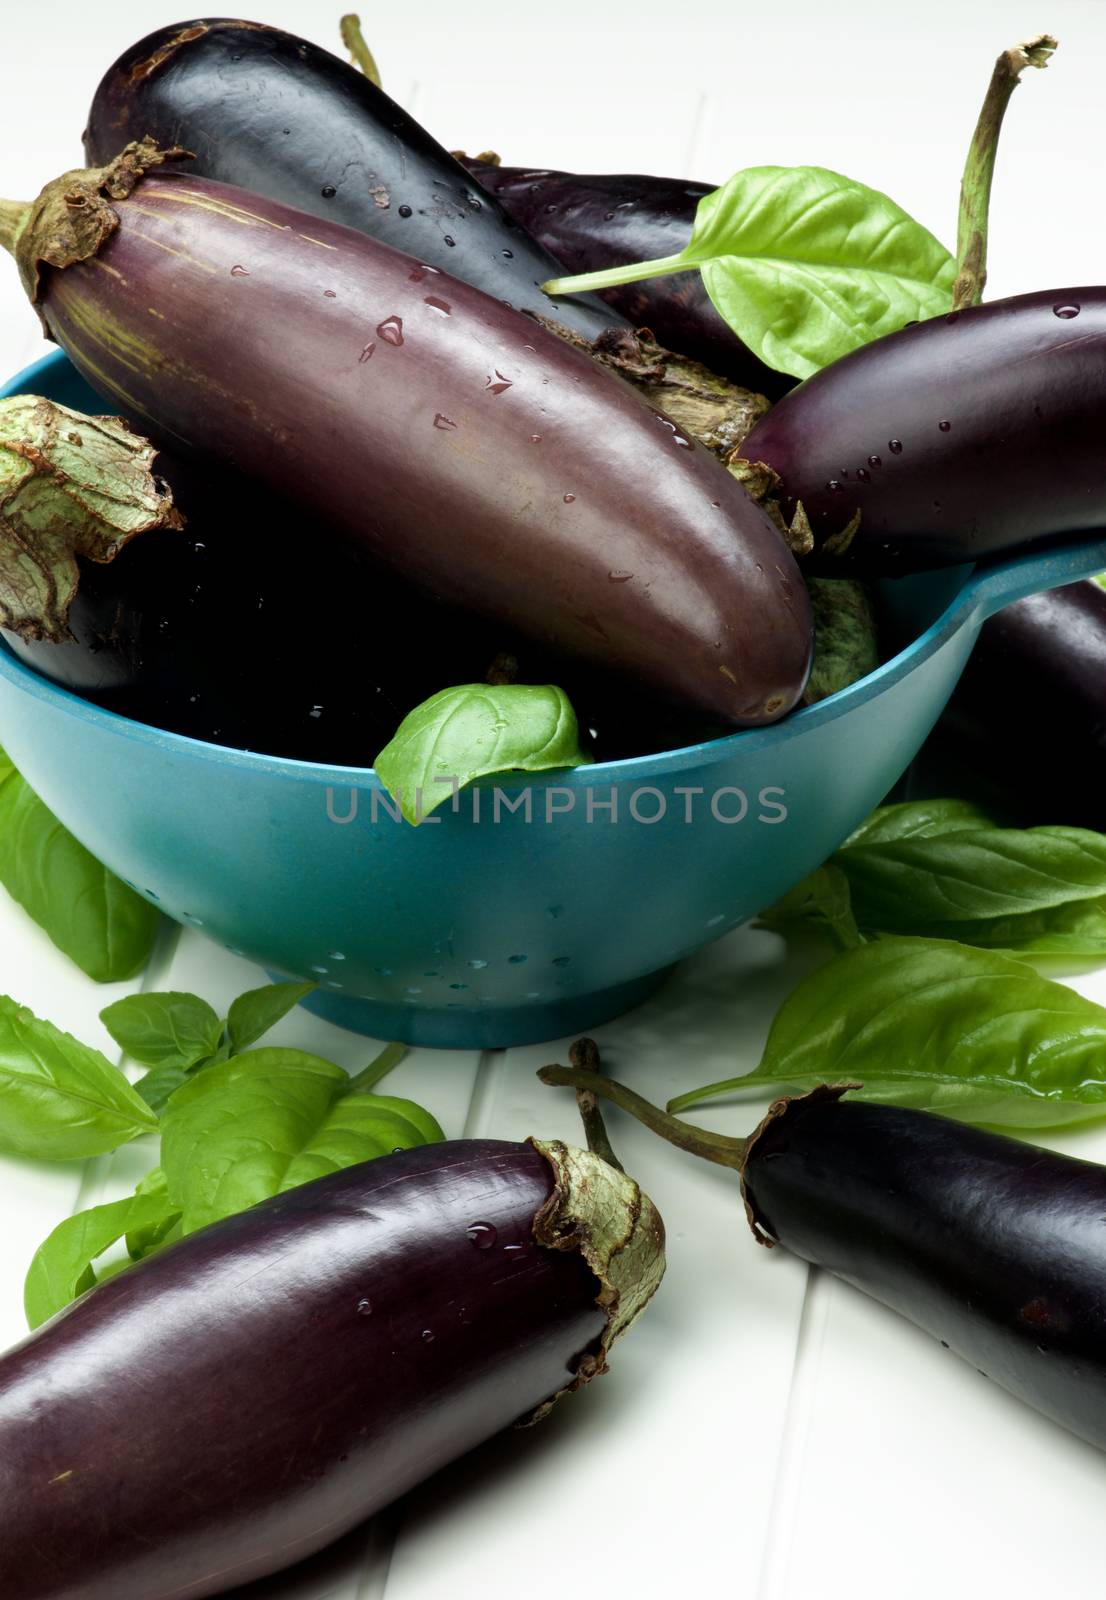 Blue Colander Full of Fresh Raw Small Eggplants and Basil Leafs closeup on White Plank background